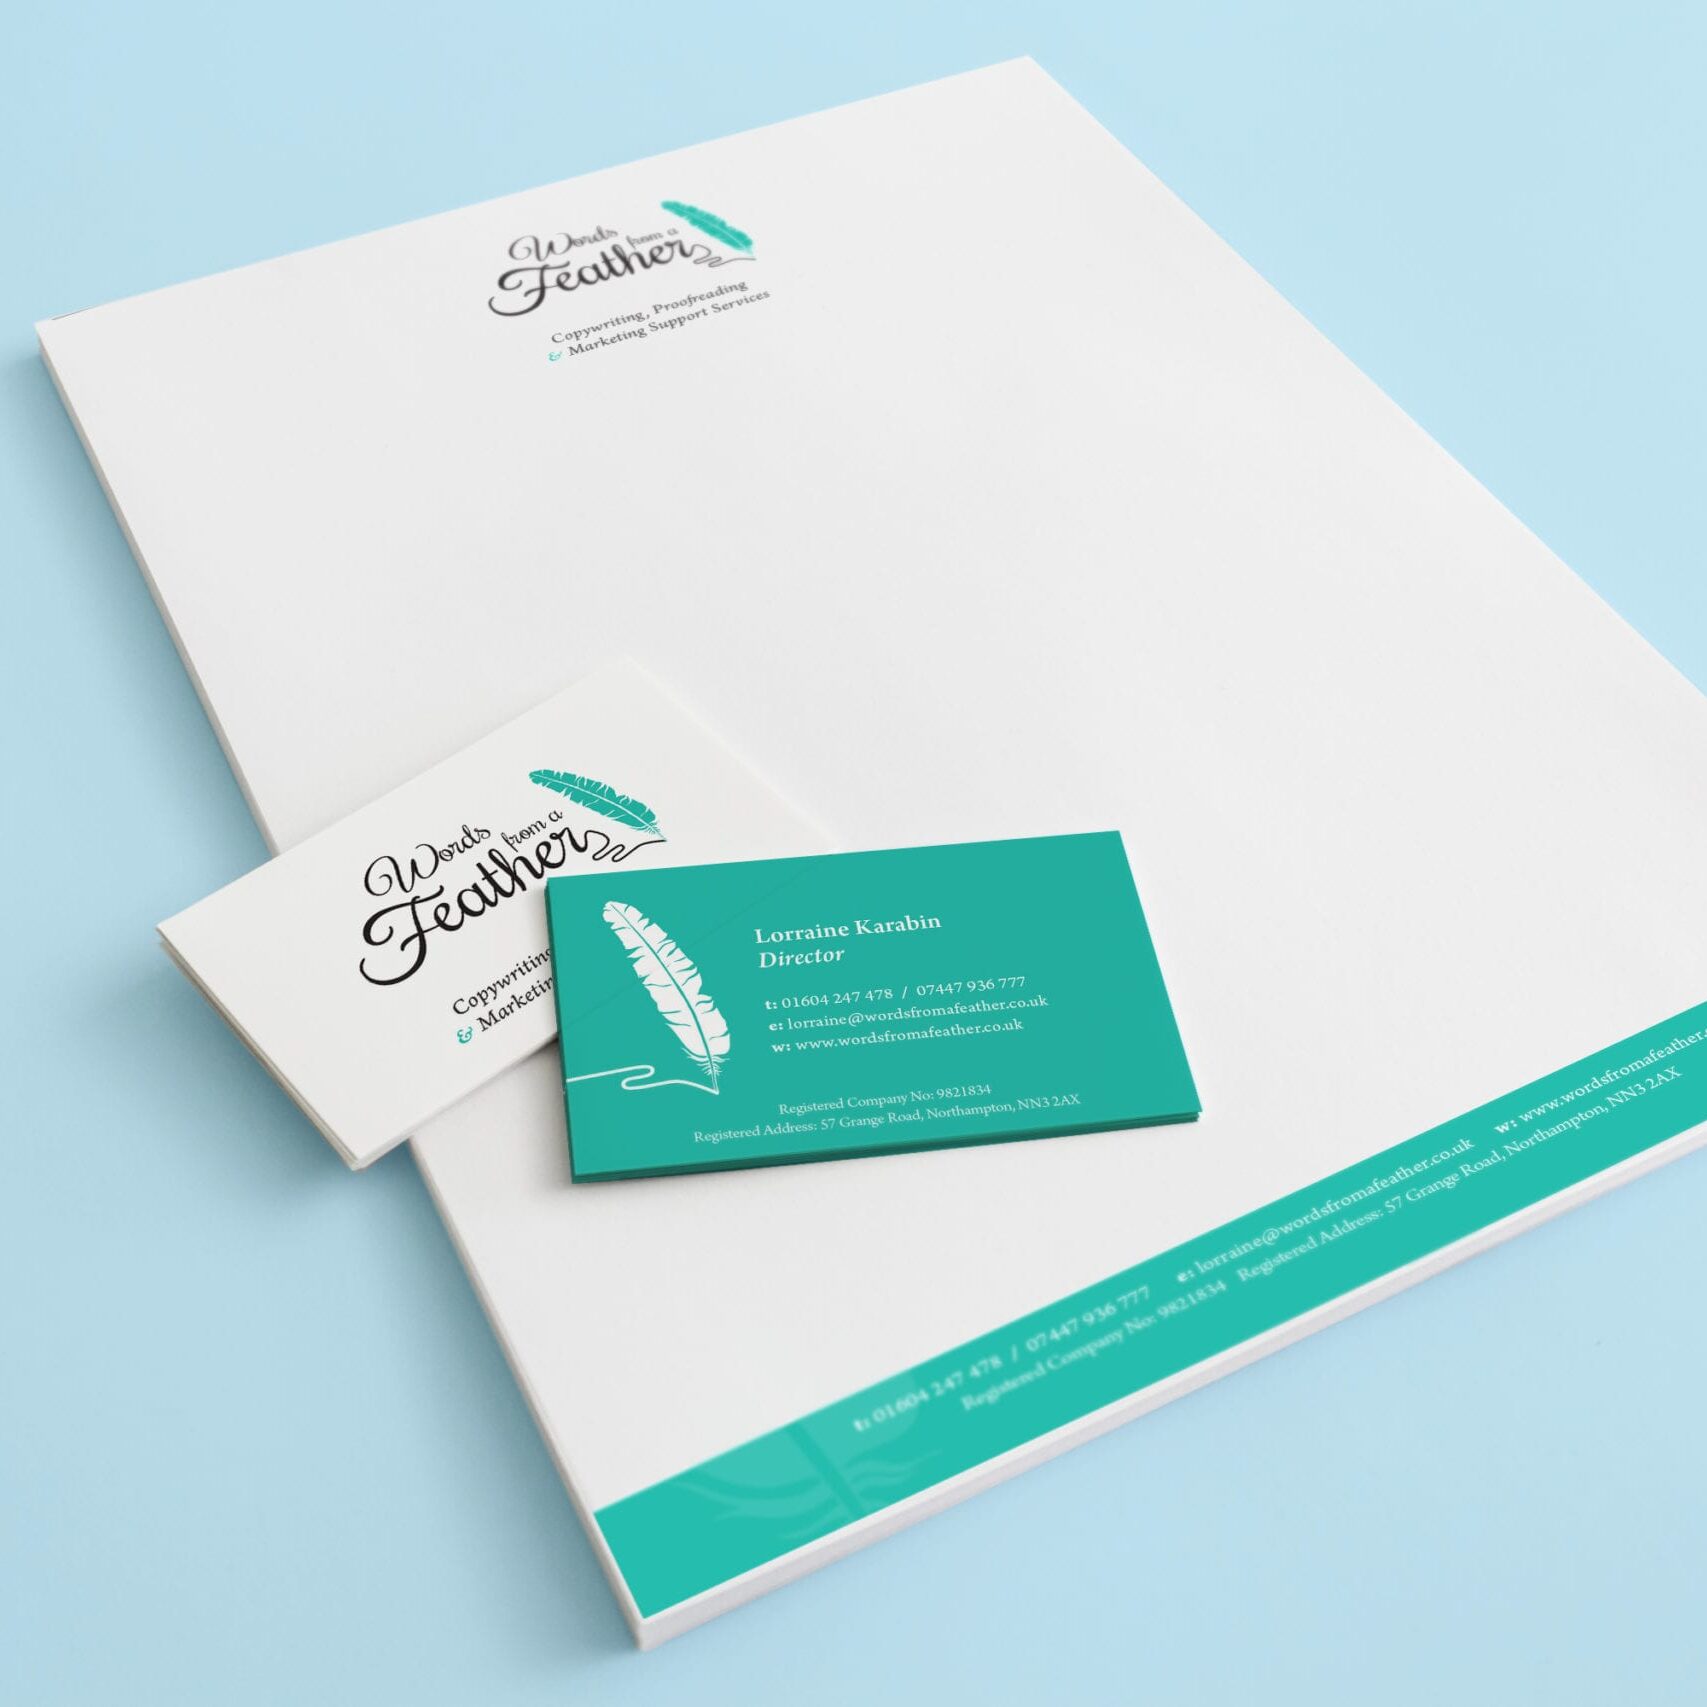 Letterhead and business cards for Words from a Feather